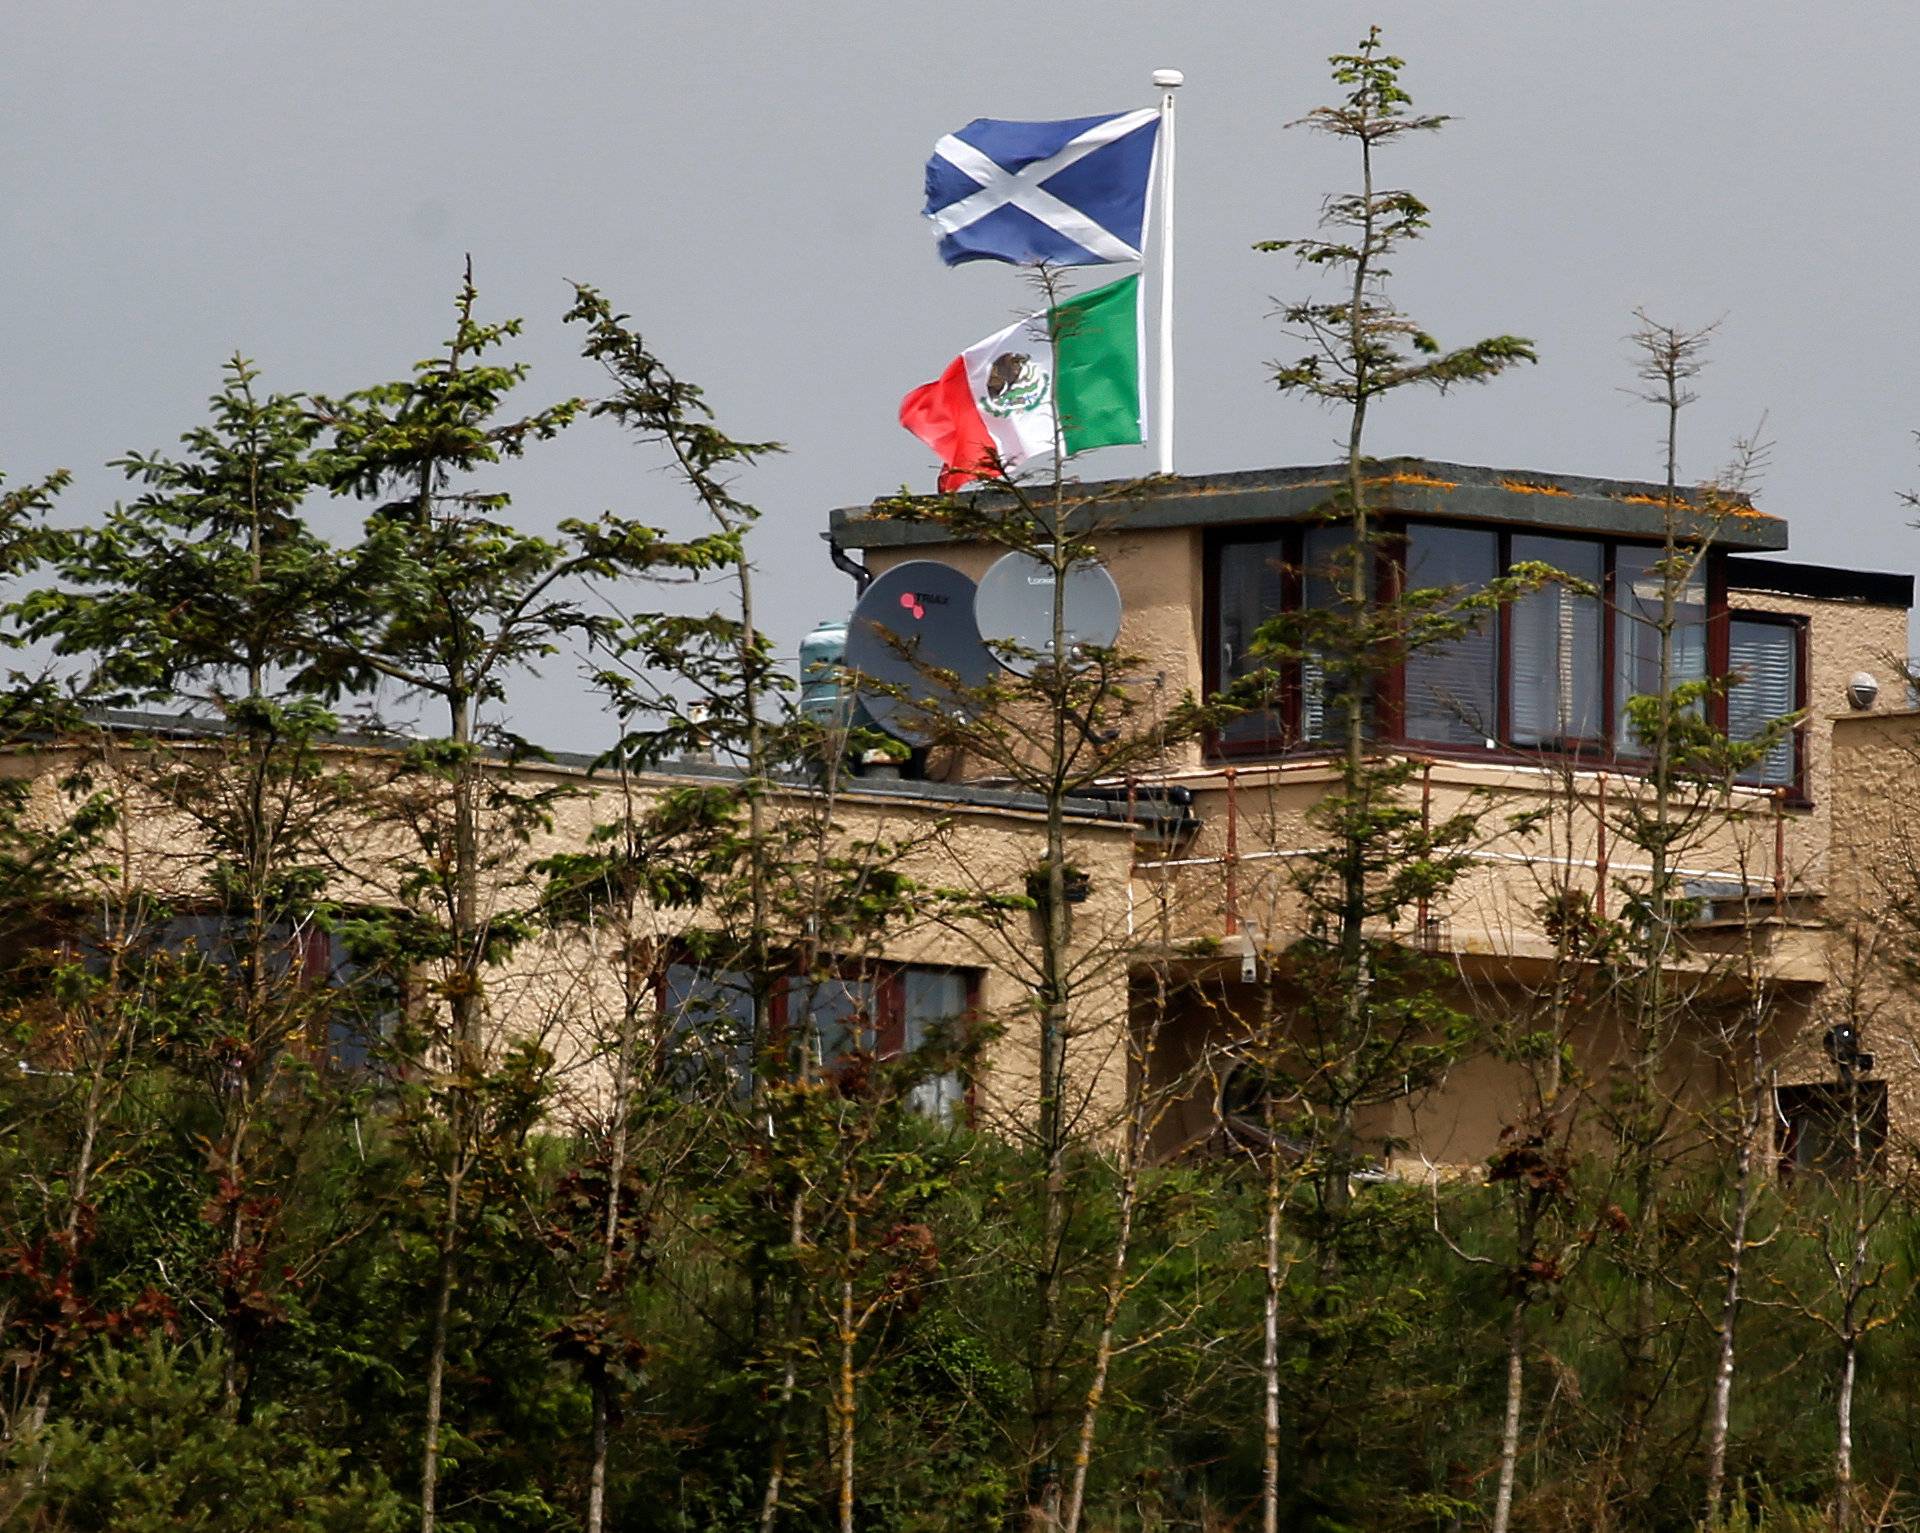 A home that overlooks Trump International Golf Links flies Mexican and Scottish flags before the arrival of Republican presidential candidate Donald Trump in Aberdeen